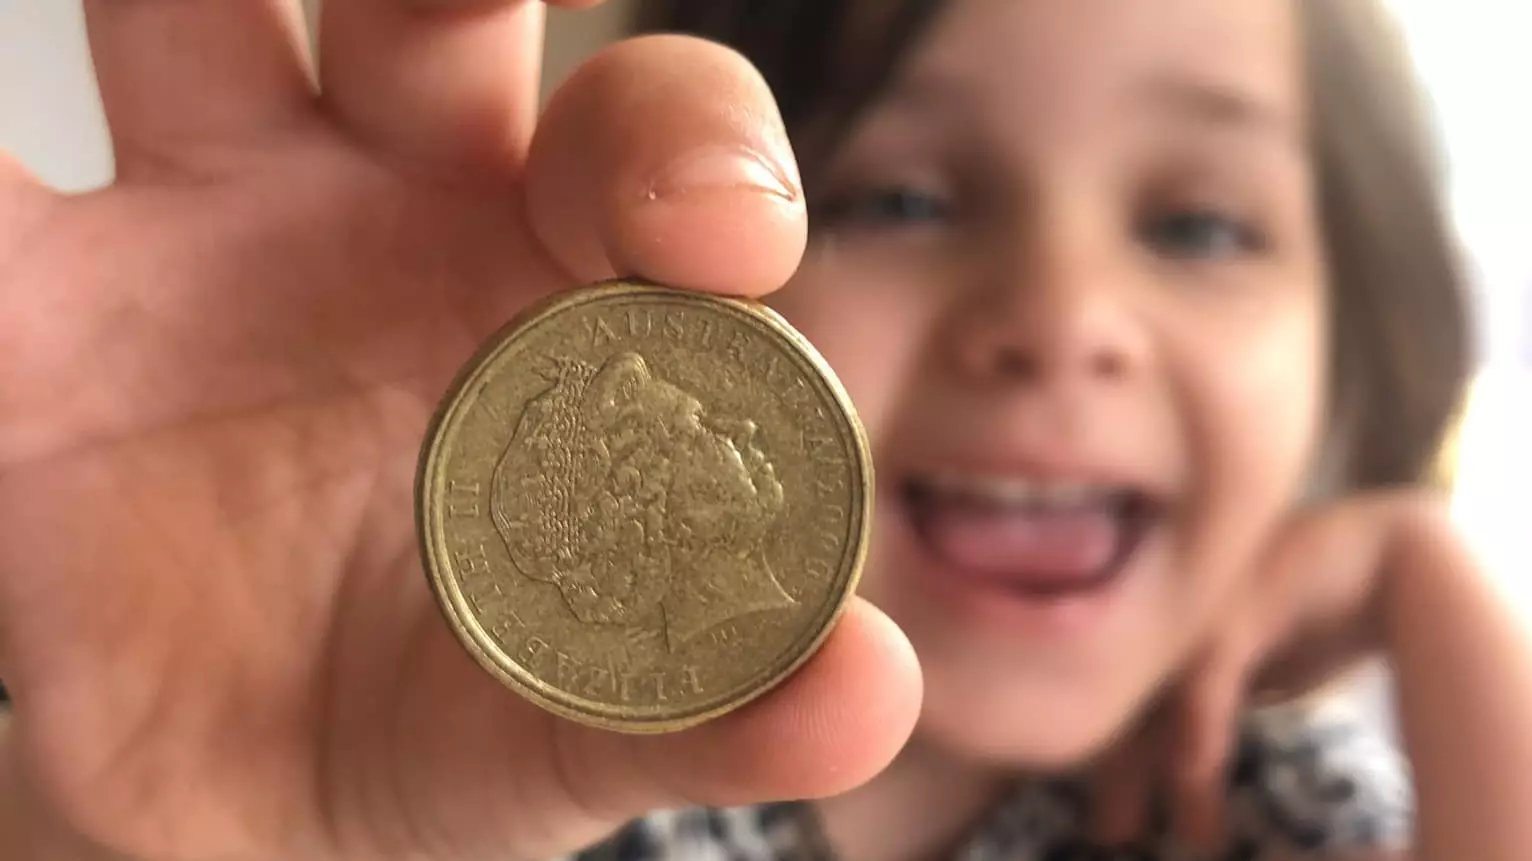 Melbourne Mum Finds $1 Coin That’s Worth Up To $3,000